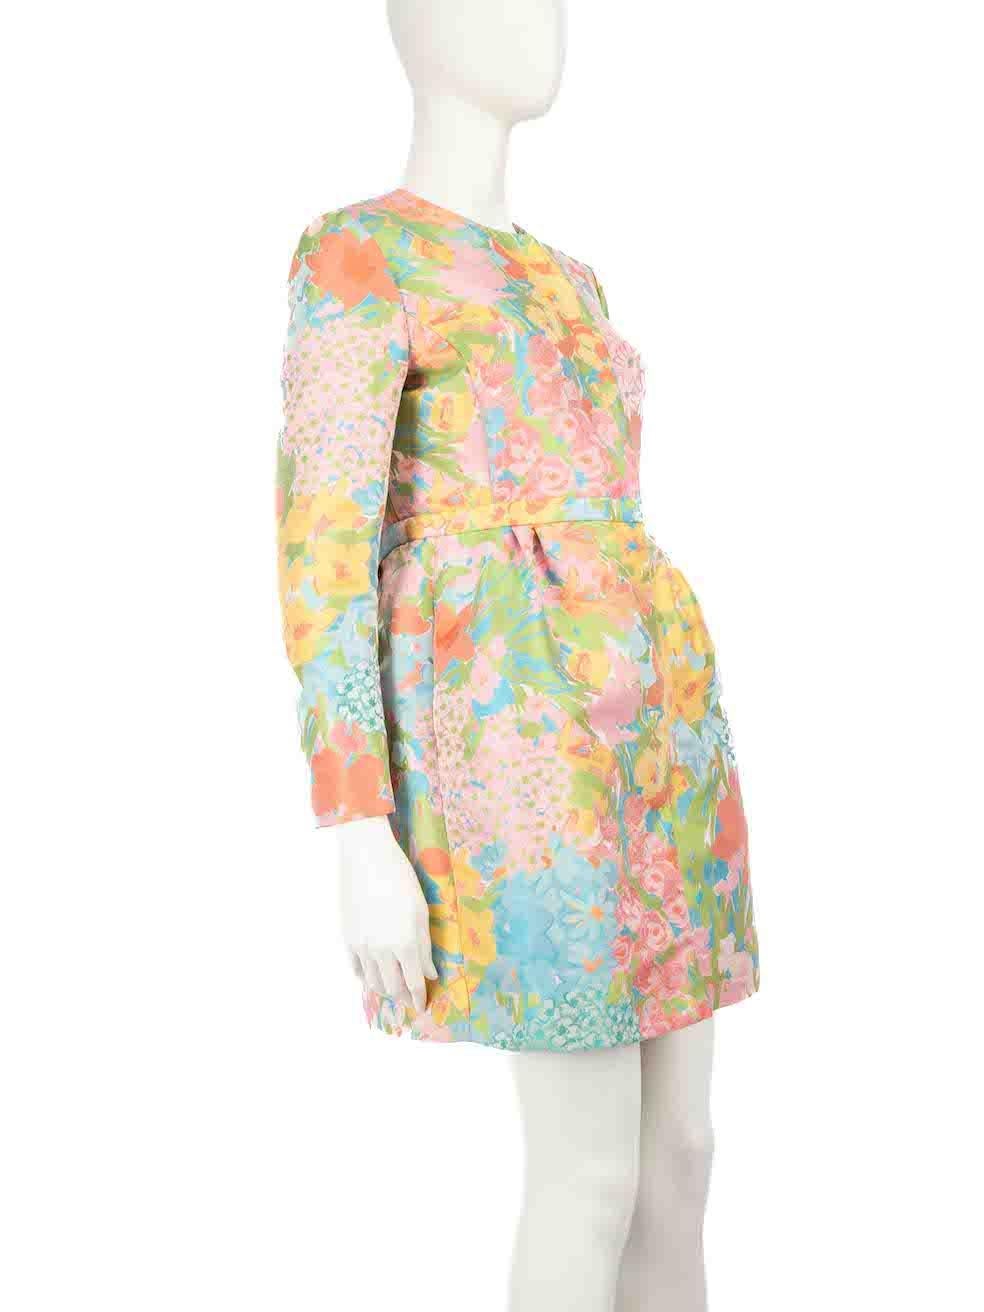 CONDITION is Very good. Hardly any visible wear to the coat is evident on this used Boutique Moschino designer resale item.
 
 
 
 Details
 
 
 Multicolour
 
 Polyester
 
 Coat
 
 Floral pattern
 
 Snap button fastening
 
 Round neck
 
 Long